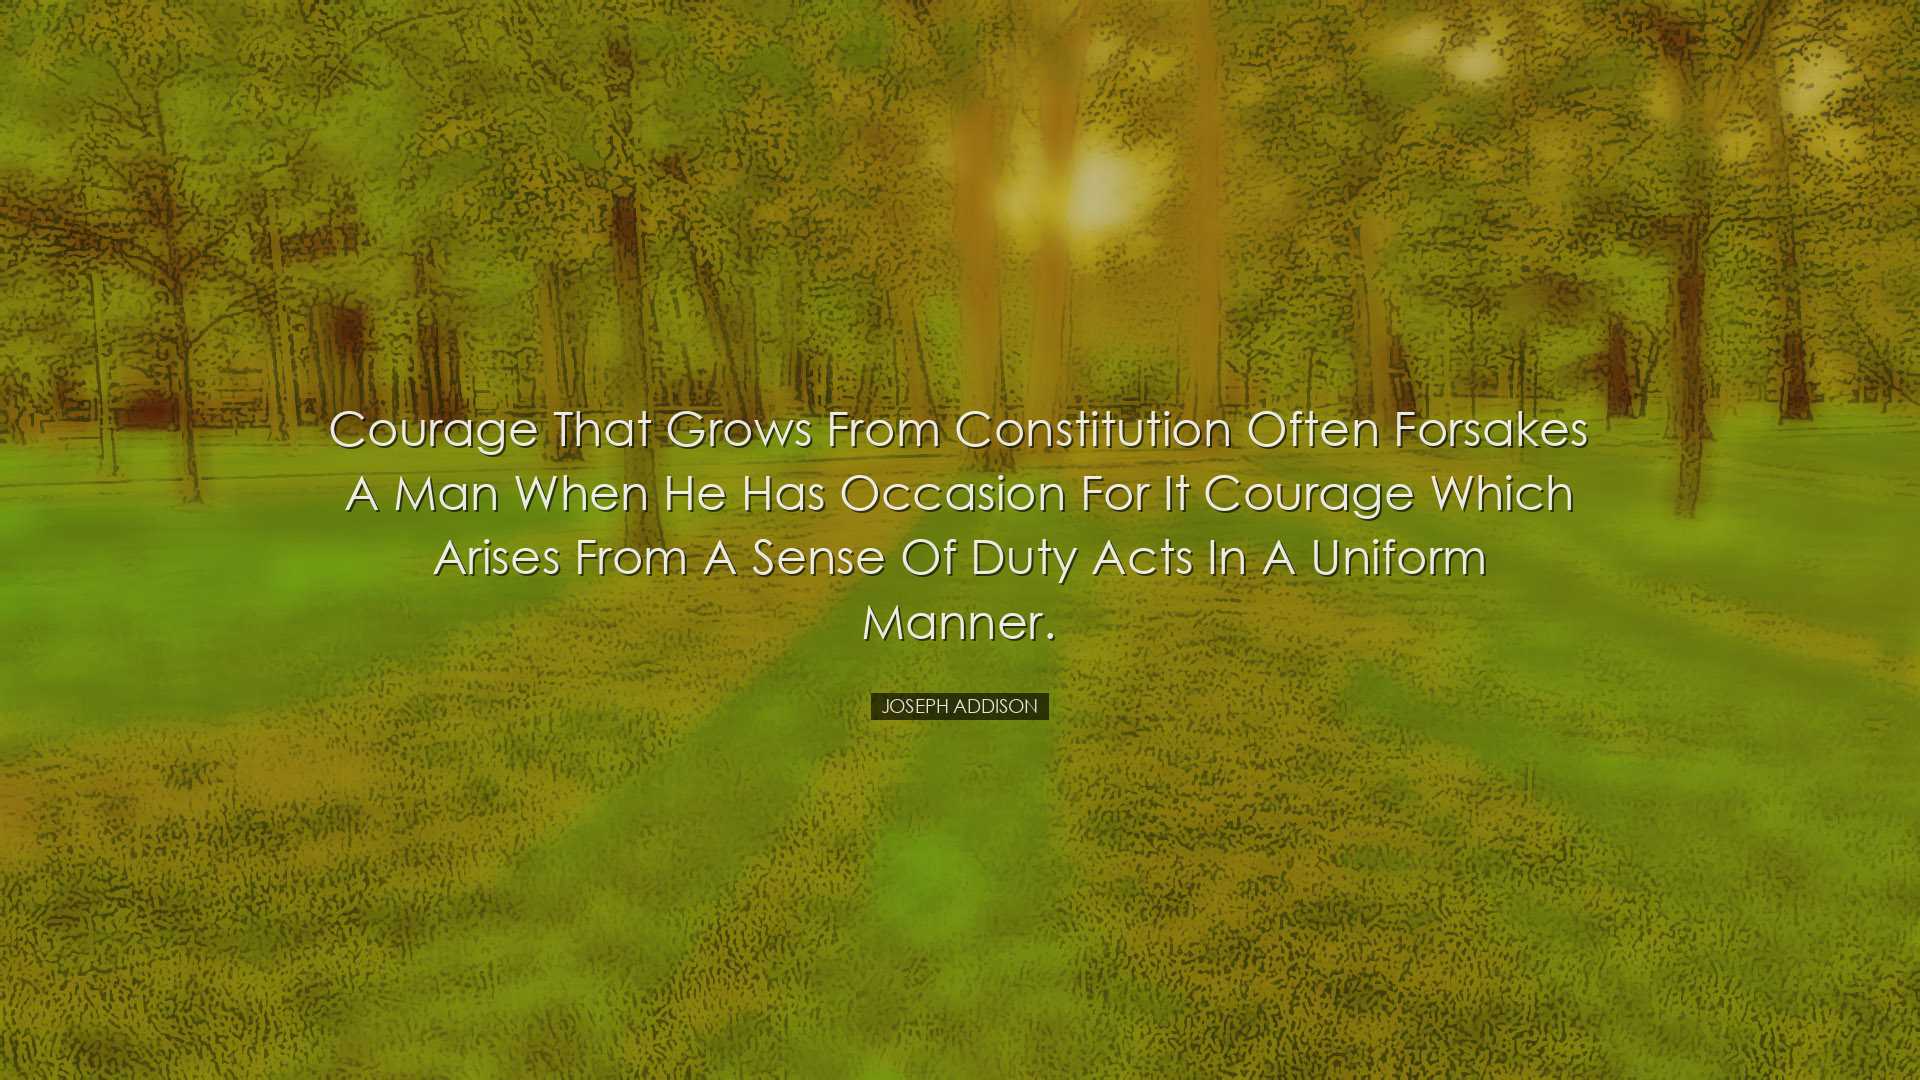 Courage that grows from constitution often forsakes a man when he